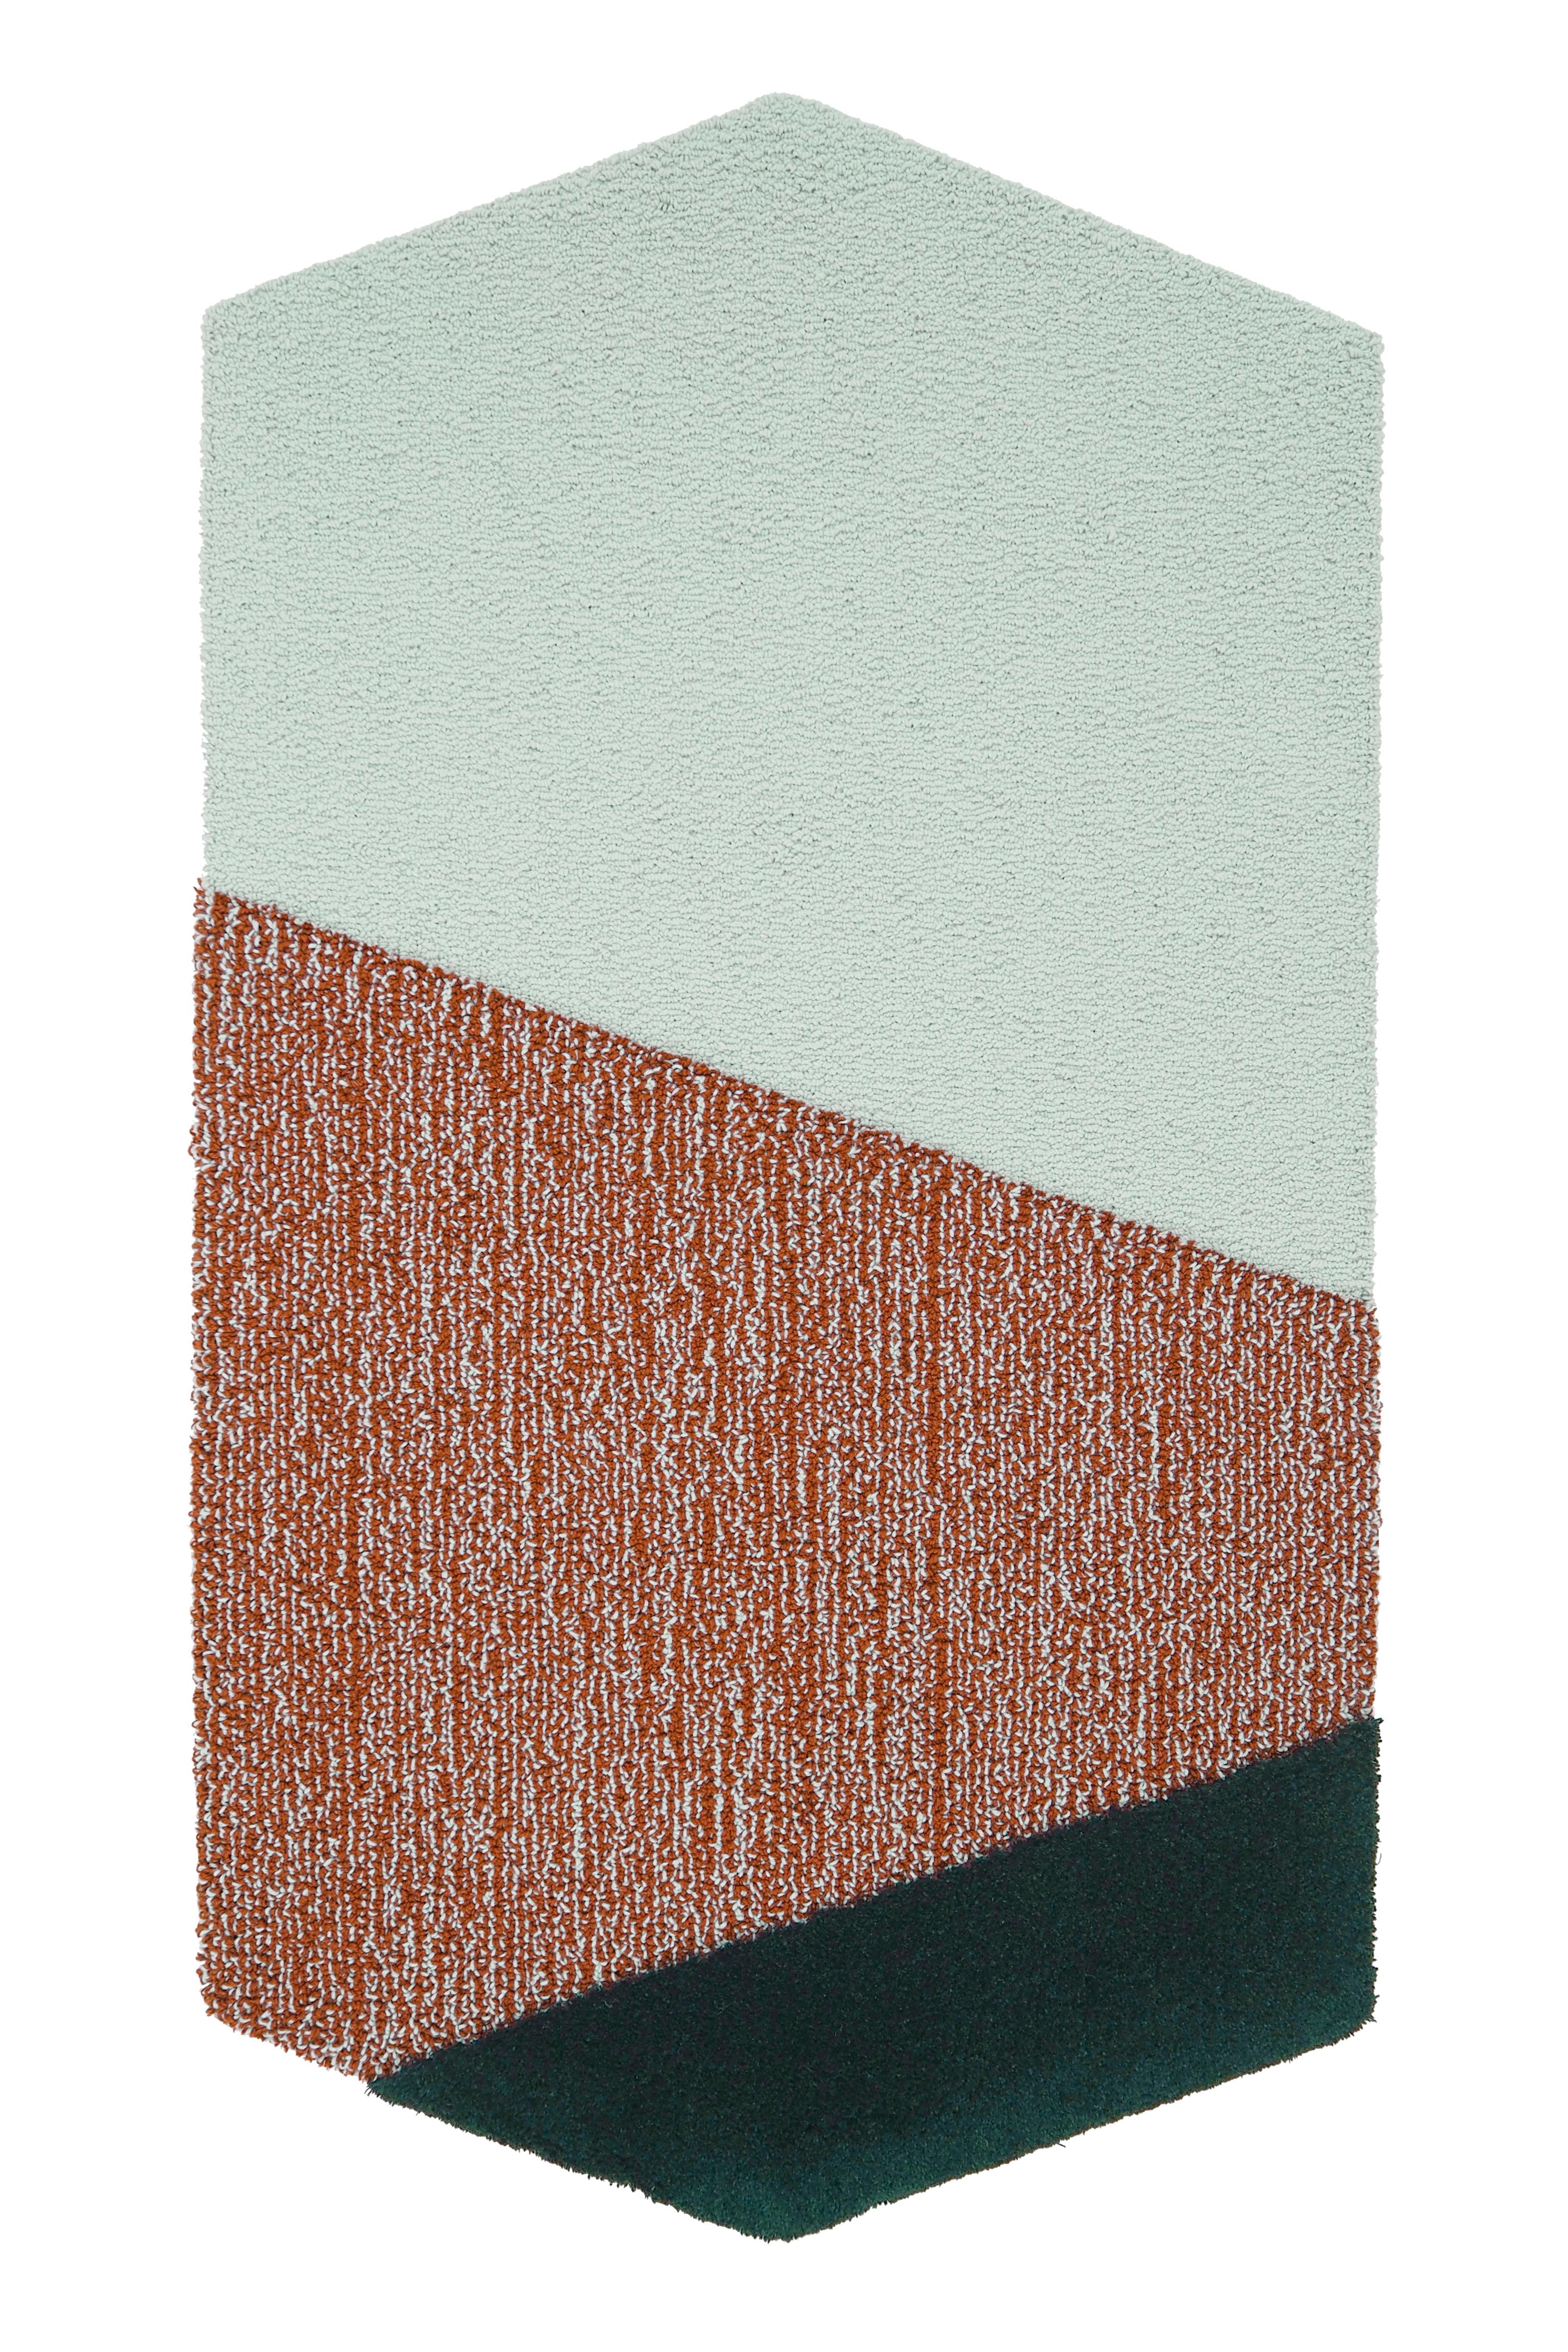 Machine-Made OCI Triptych S, Composition of 3 Rugs 100% Wool / Green/Brick by Portego For Sale